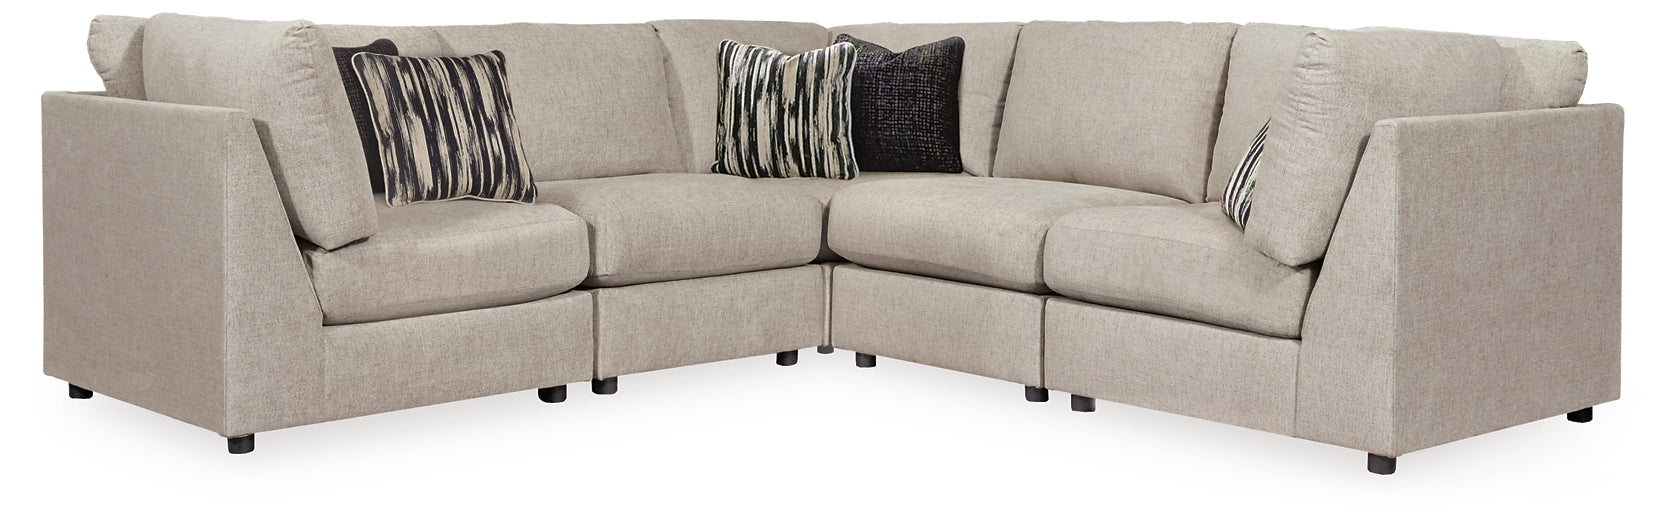 Kellway 5-Piece Sectional with Ottoman